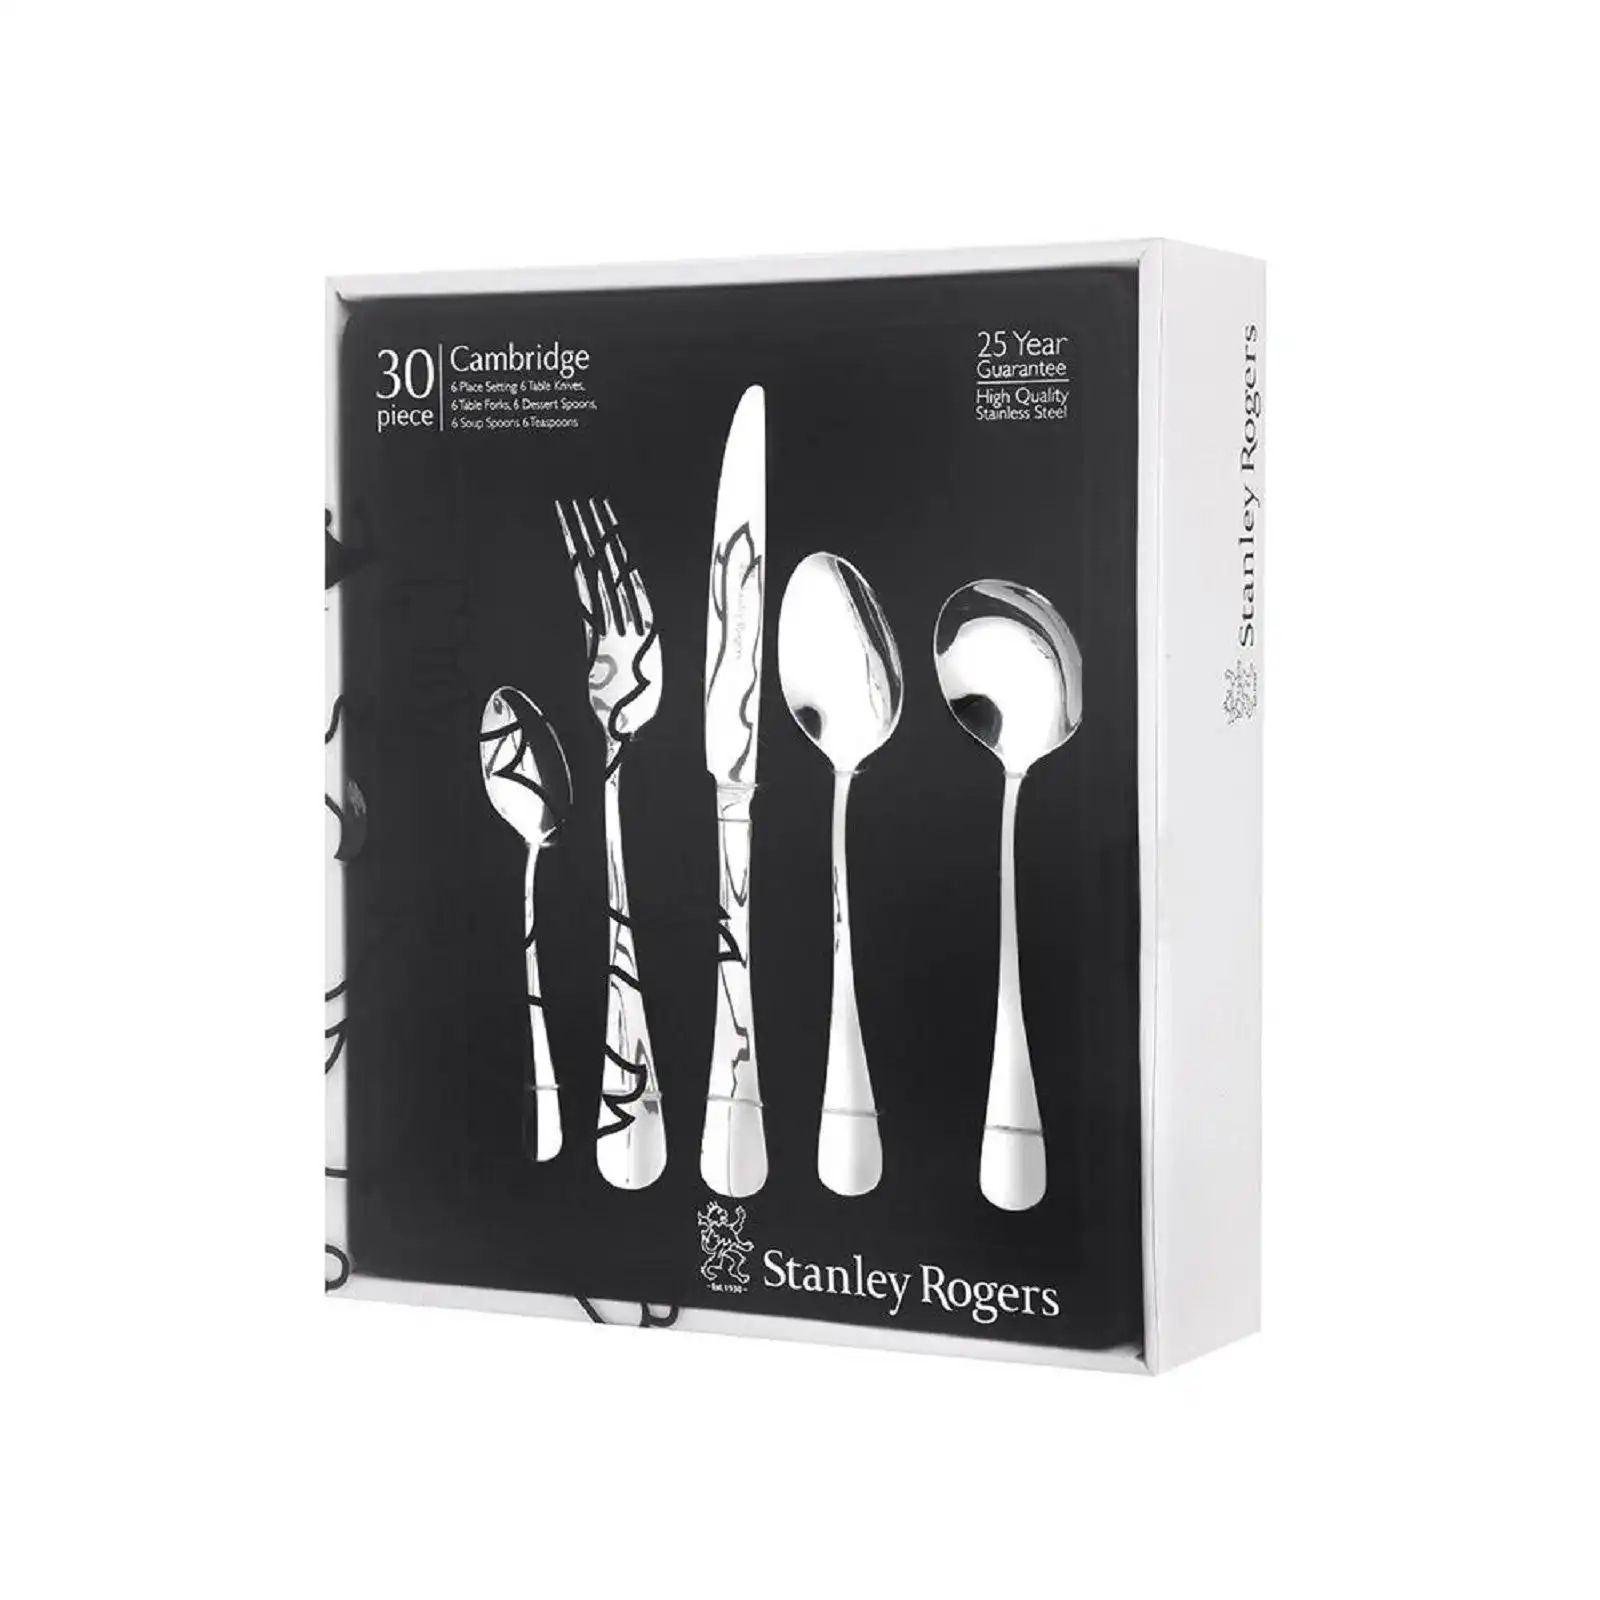 Stanley Rogers 30 Piece Cambridge Cutlery Gift Boxed Set